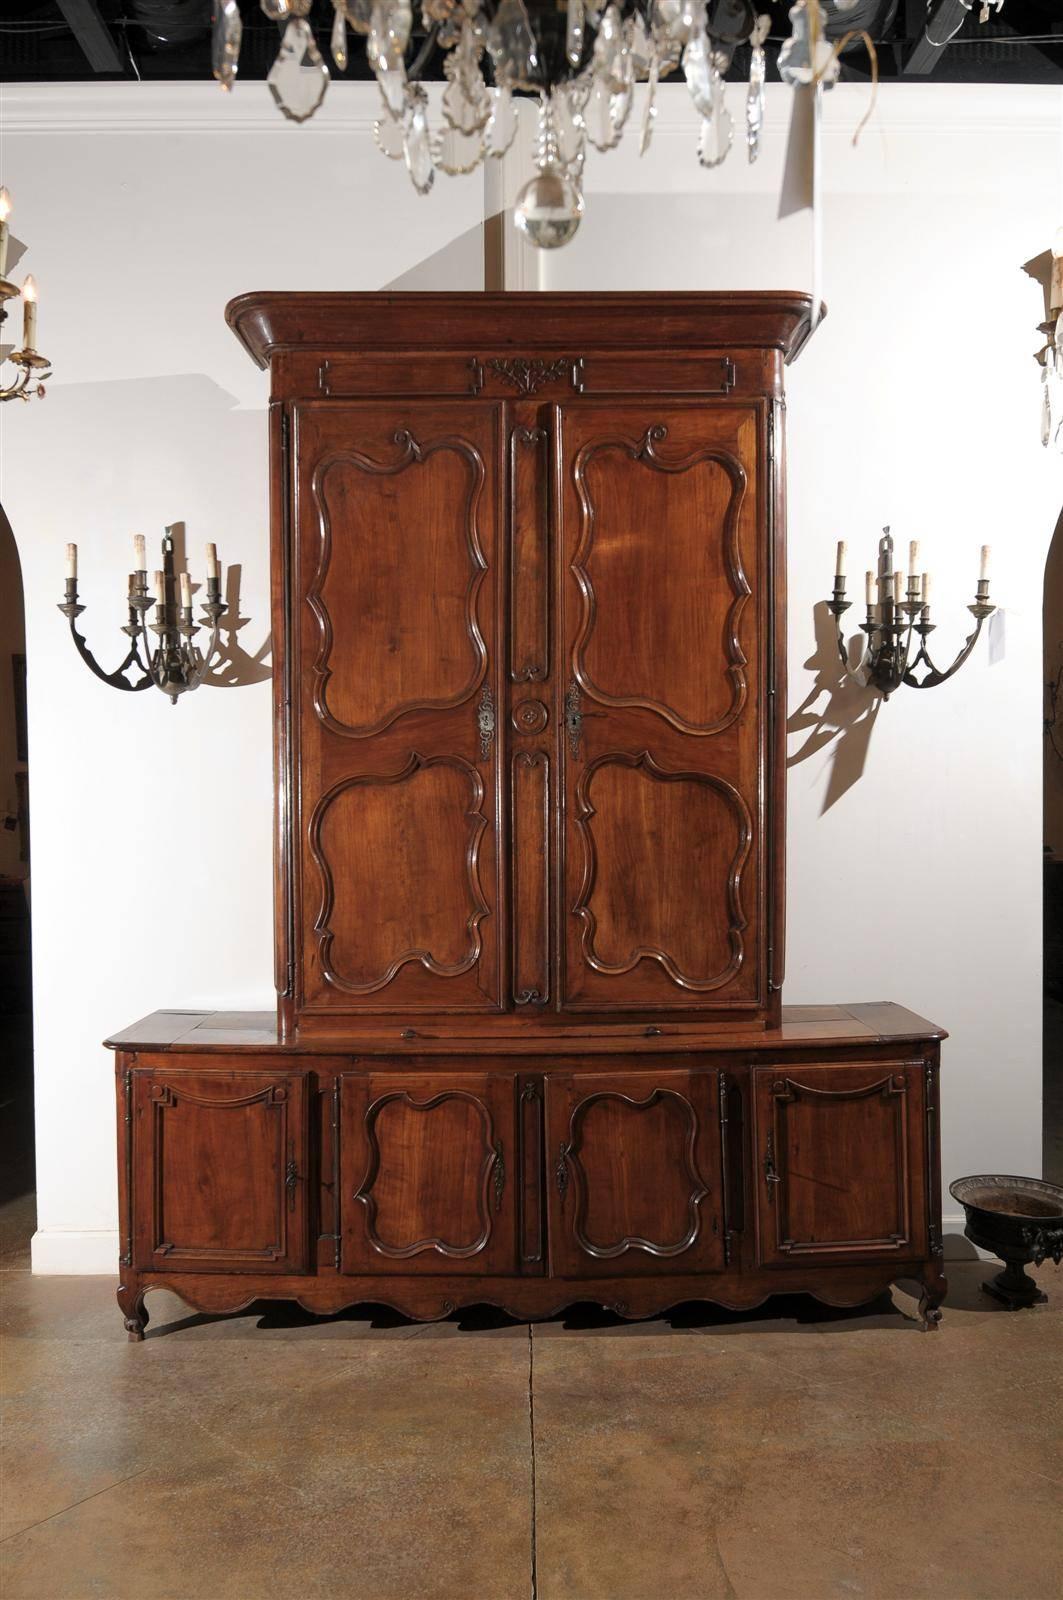 A French Louis XV period cherry buffet à deux-corps cabinet with original hand wrought-iron hardware from the mid 18th century. This French tall cabinet, which comes from an important manor house, features a lower cabinet, made of a four-door